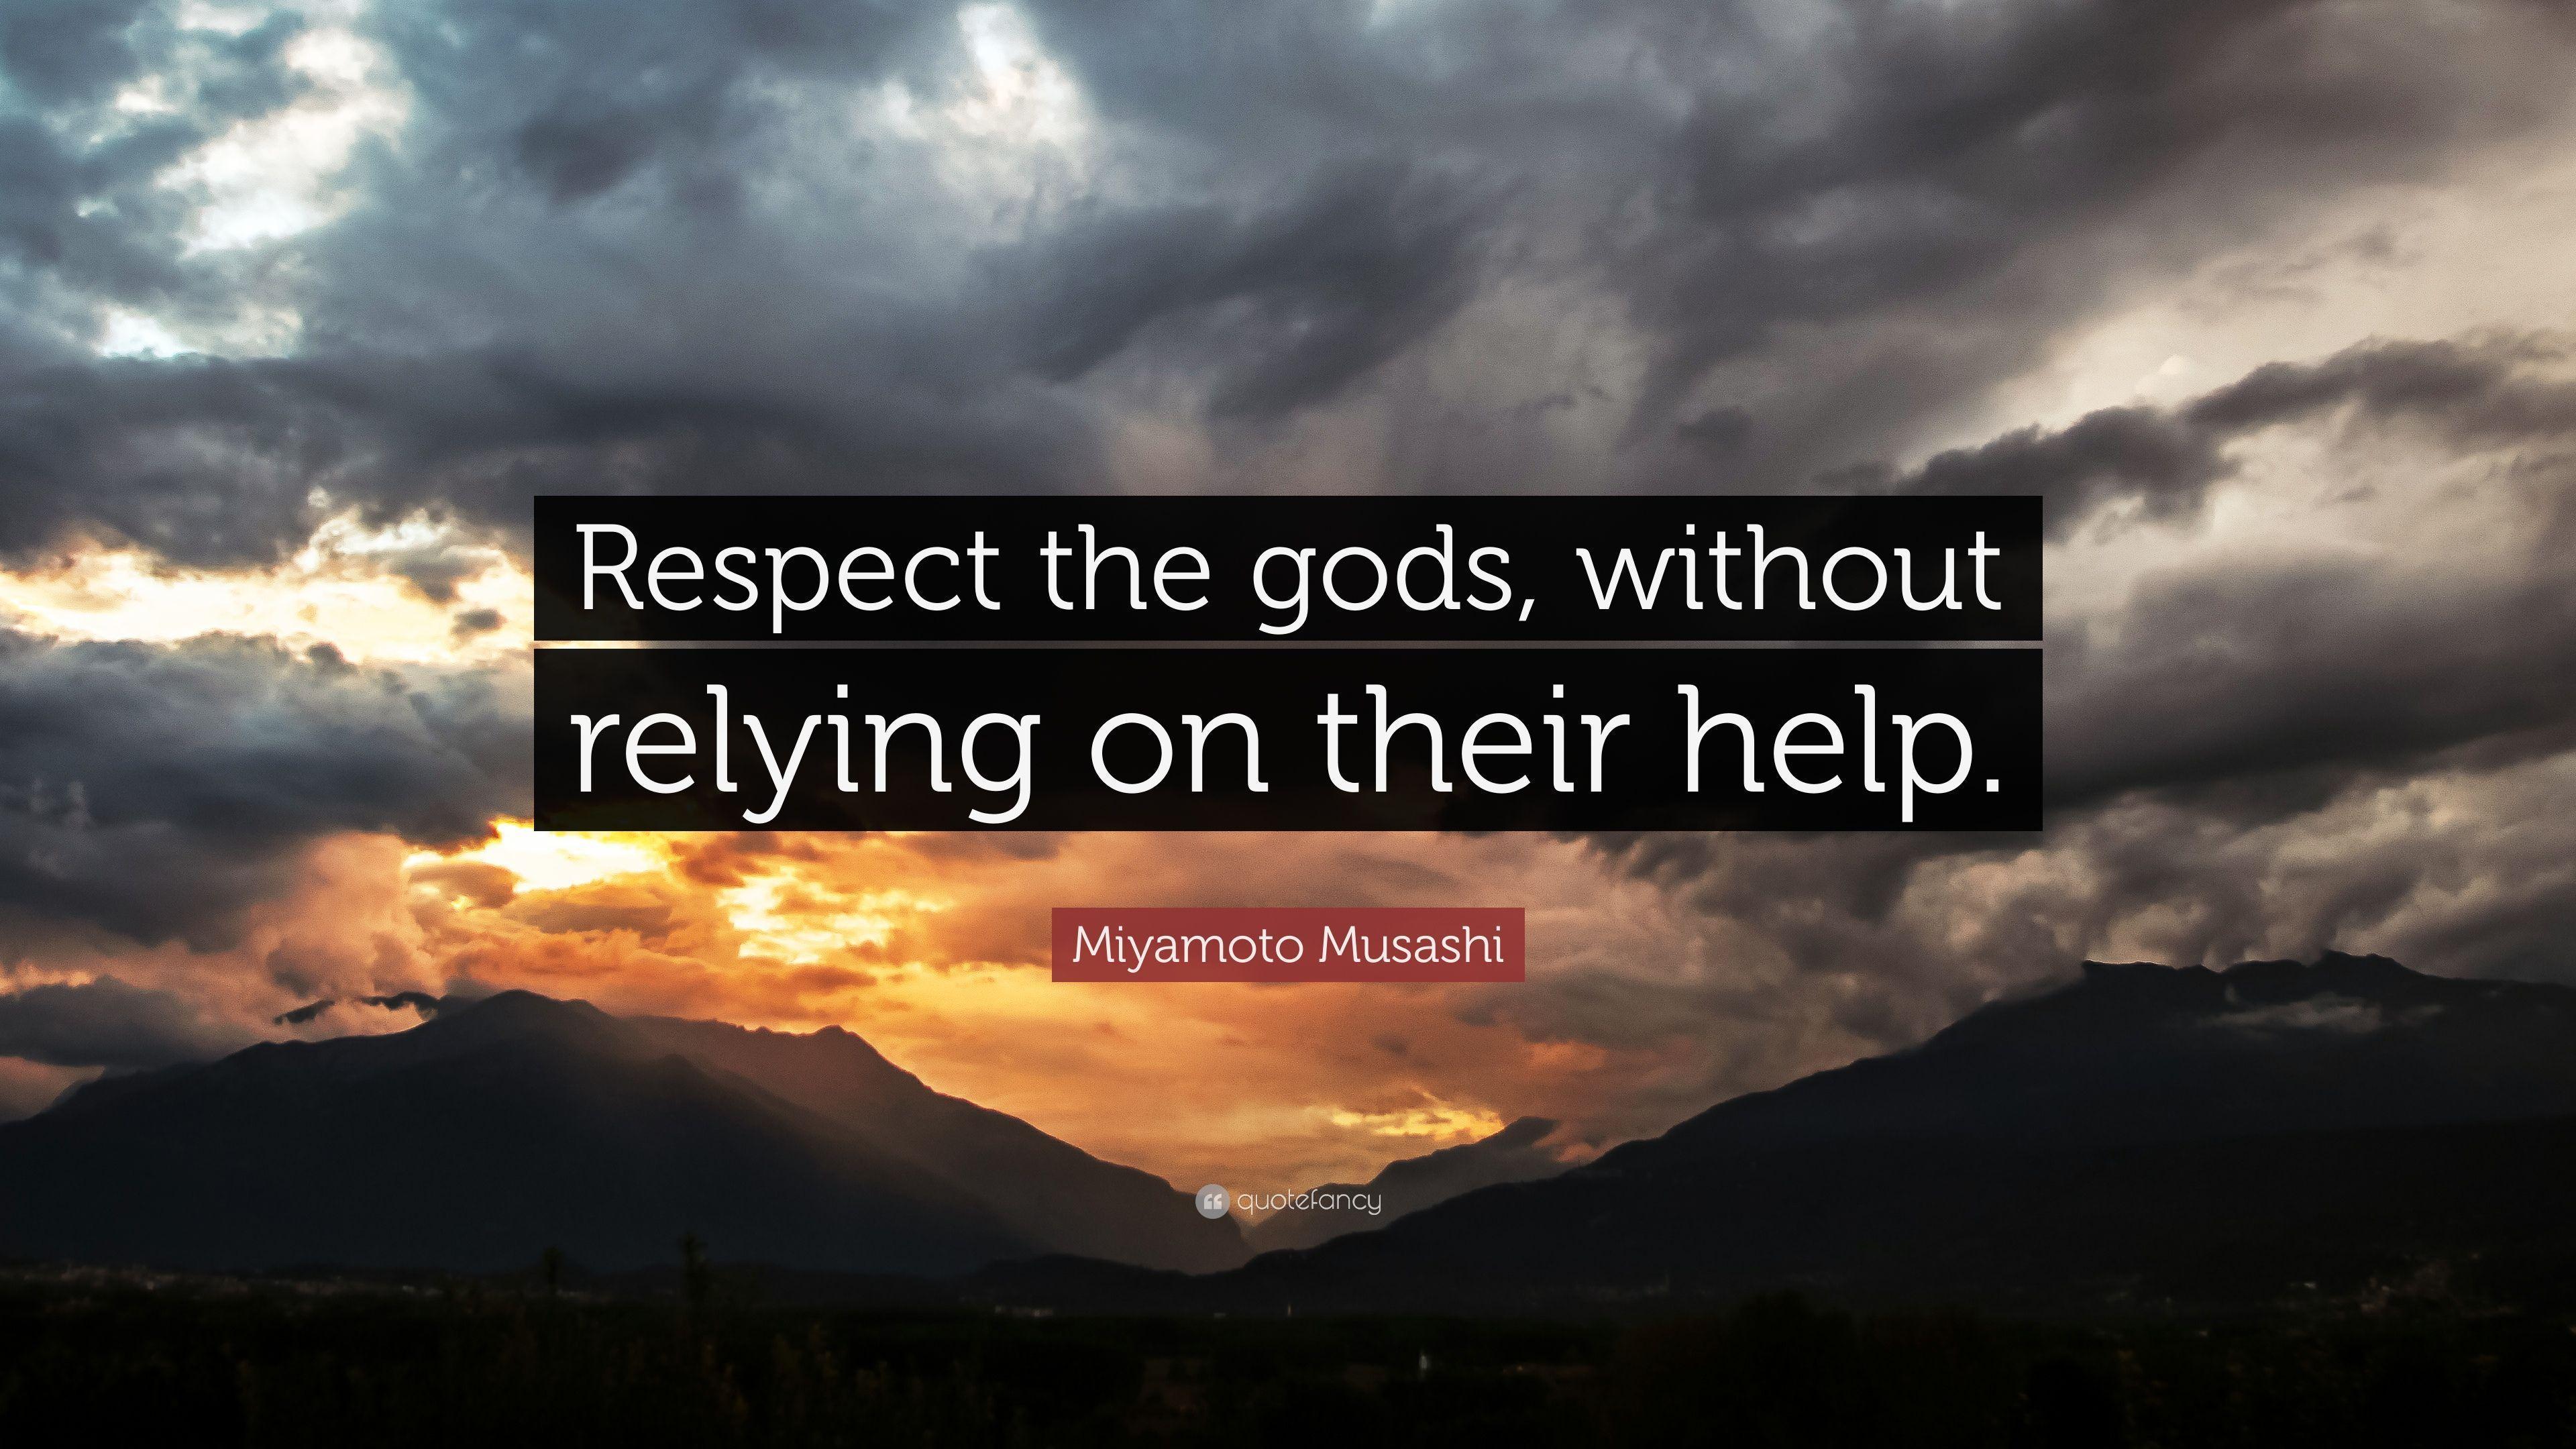 Miyamoto Musashi Quote: “Respect the gods, without relying